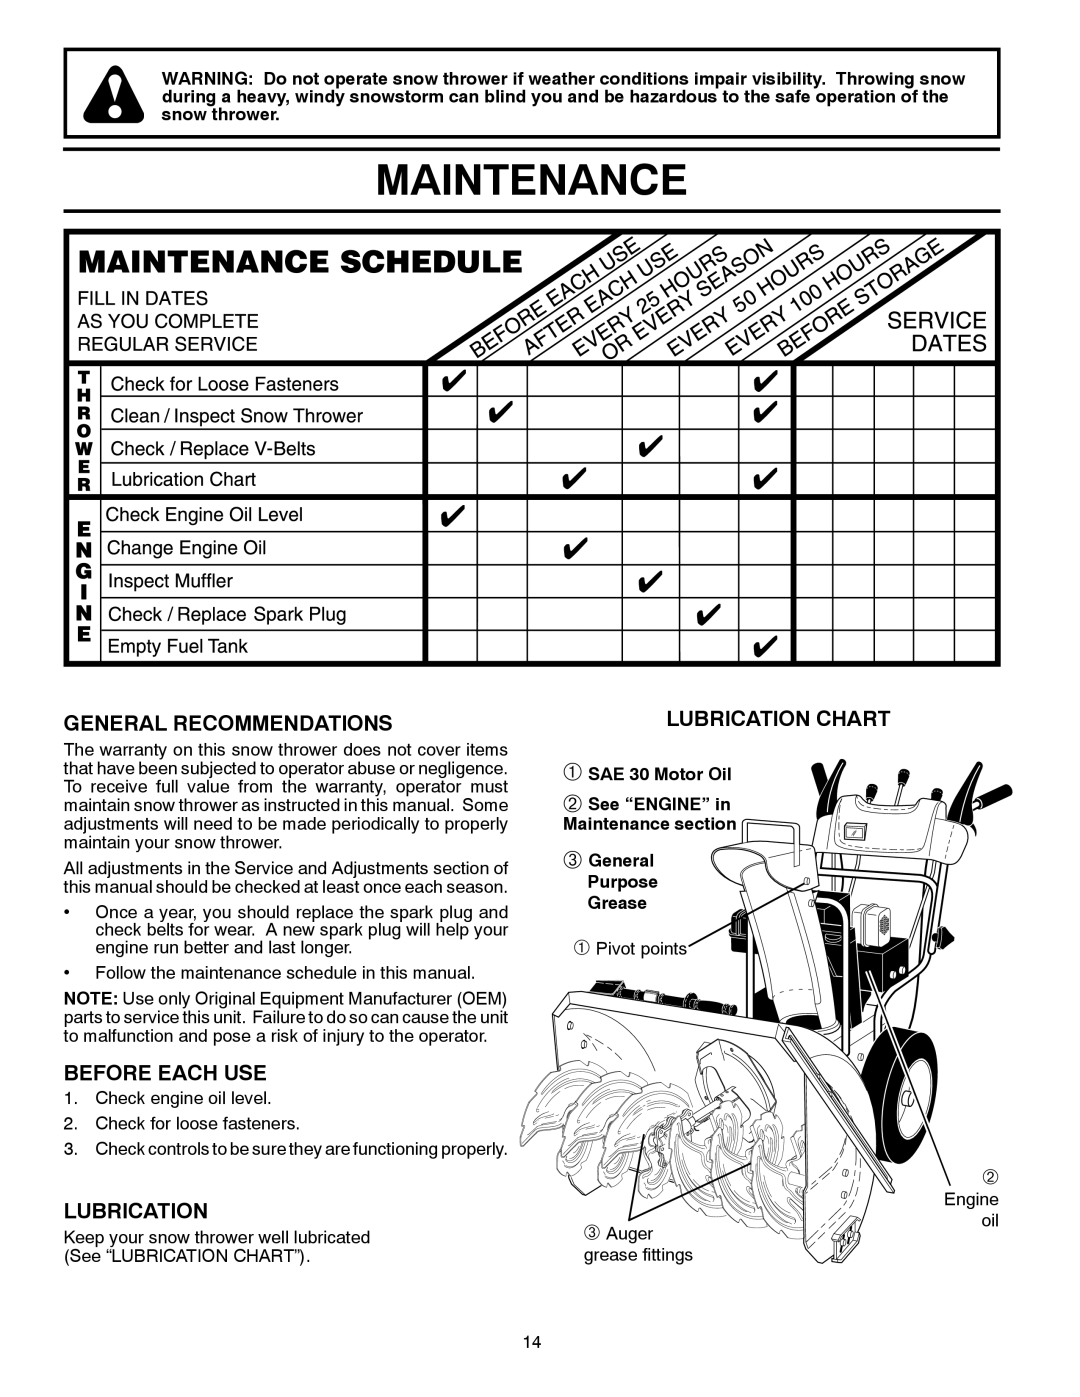 Husqvarna 14527SB-LS manual Maintenance, General Recommendations, Before Each Use, Lubrication Chart 